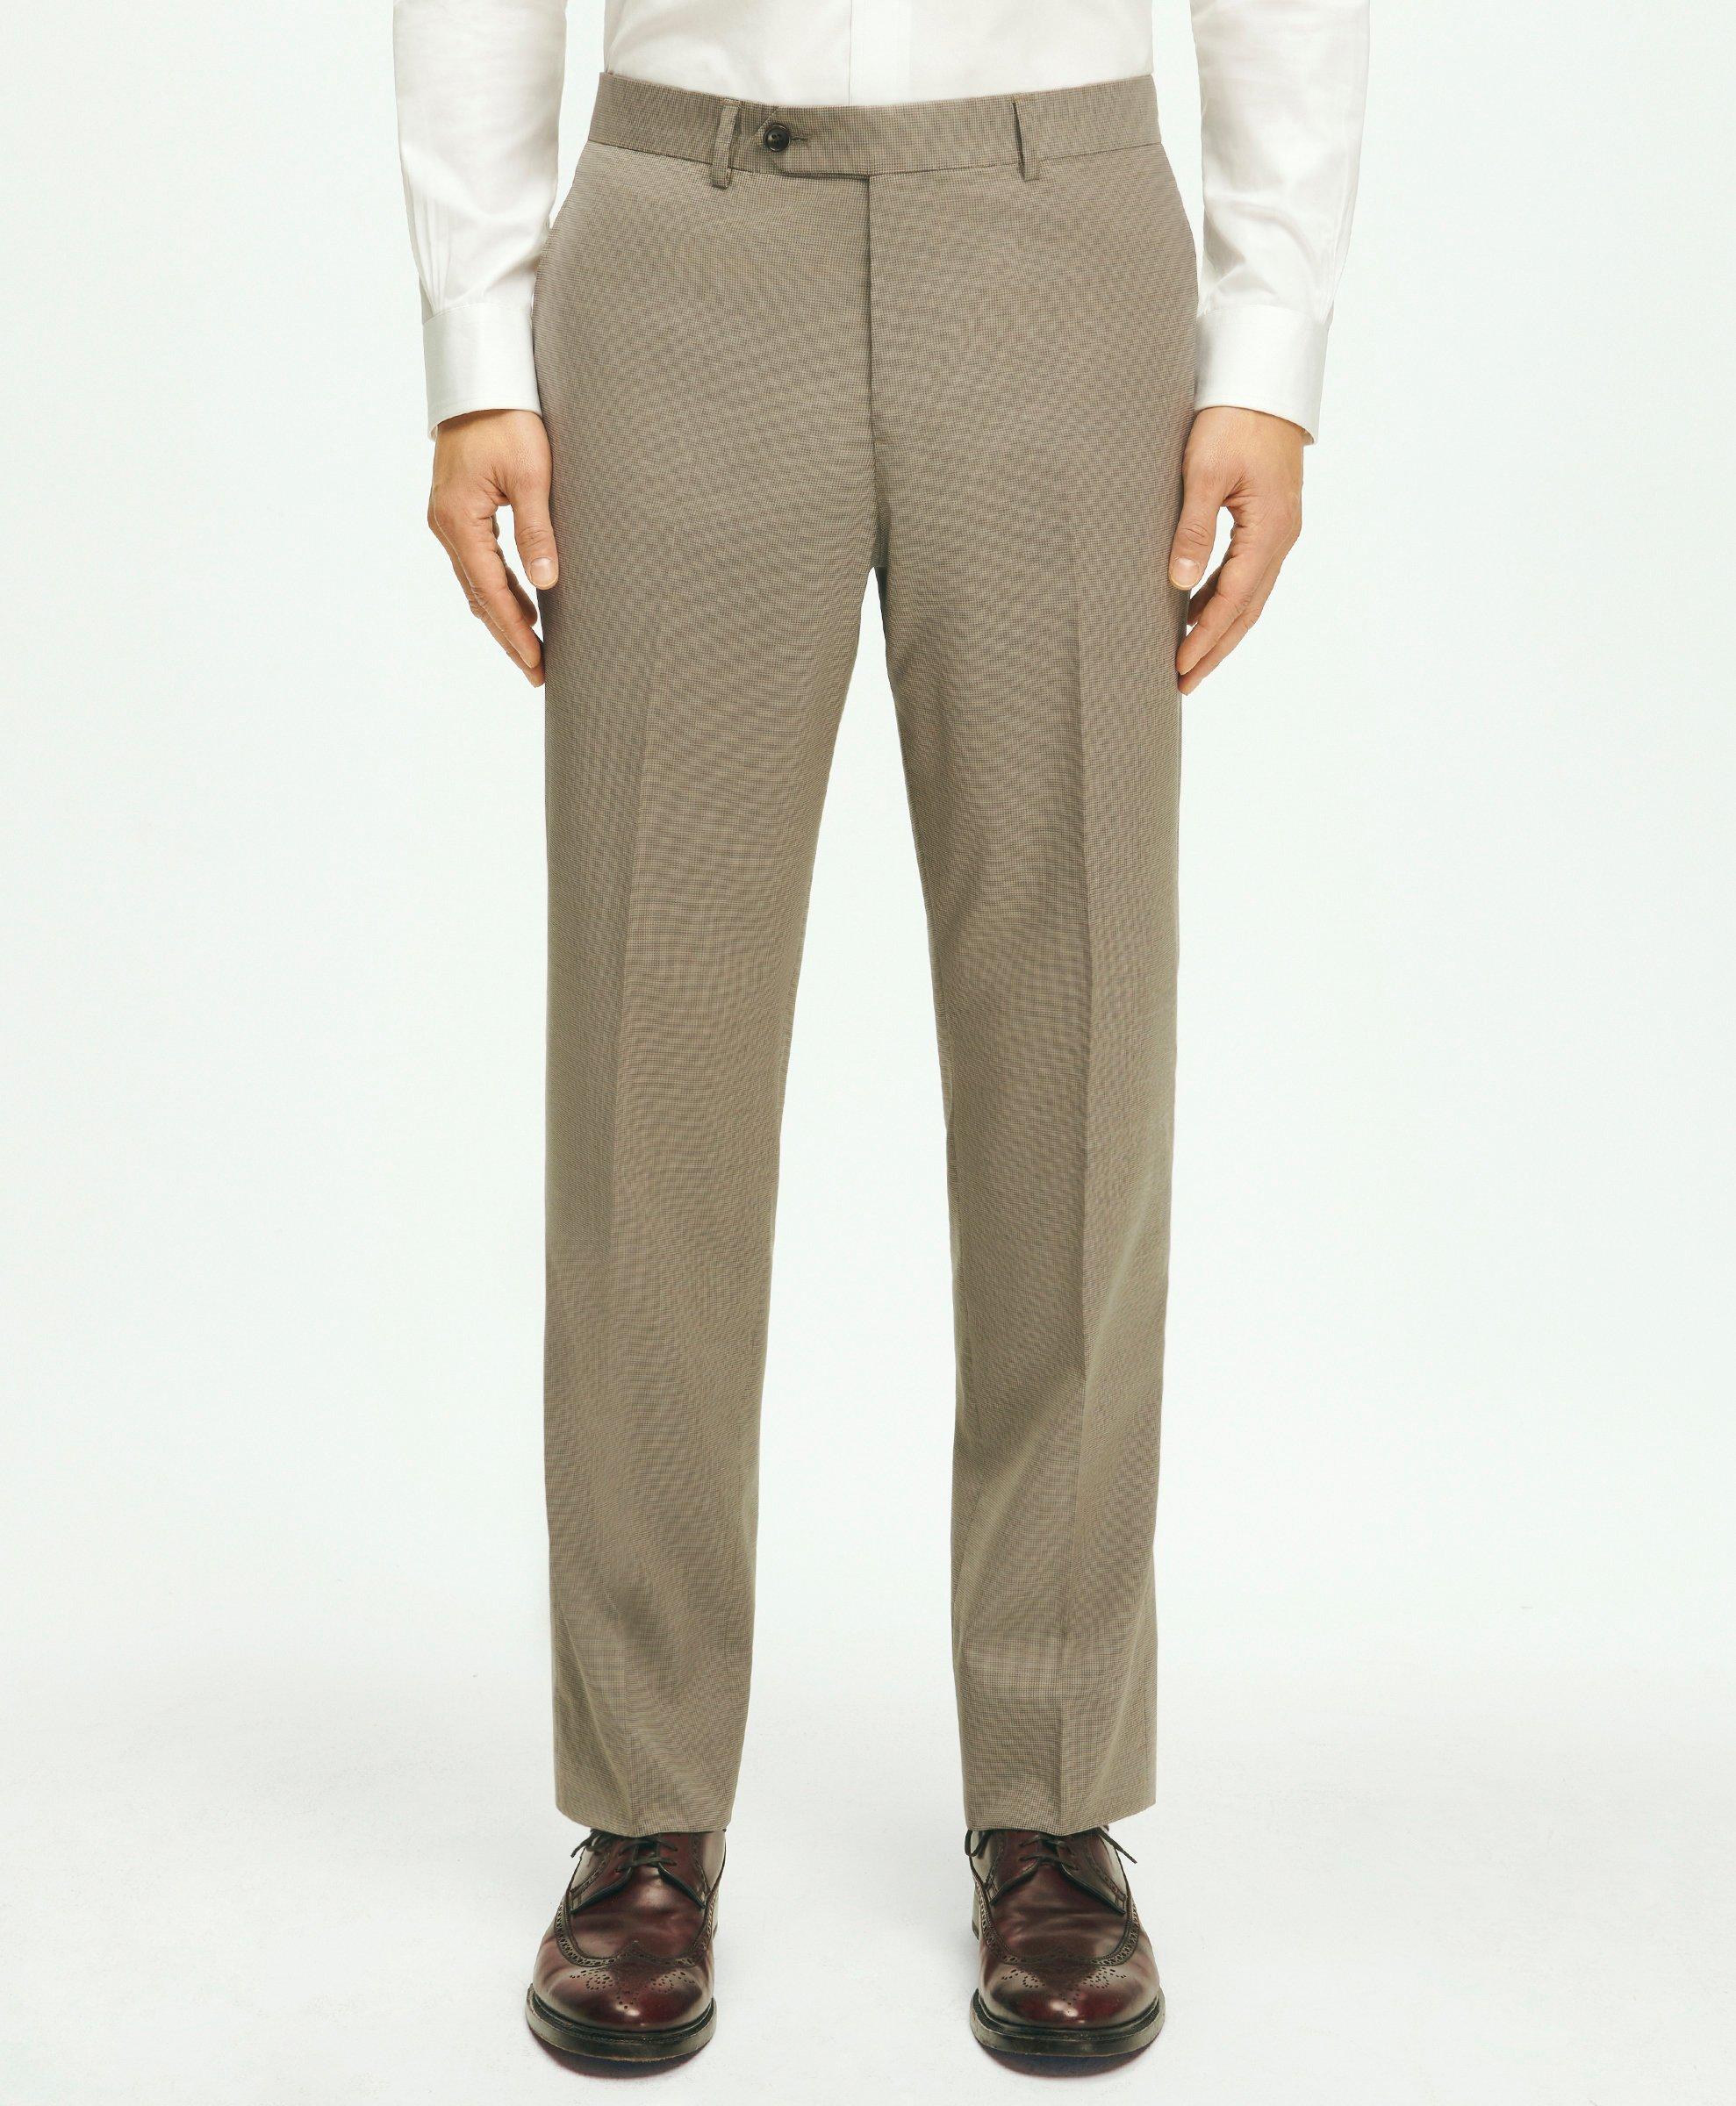 Brooks Brothers Classic Fit Stretch Wool Mini-houndstooth 1818 Dress Trousers | Khaki | Size 35 32